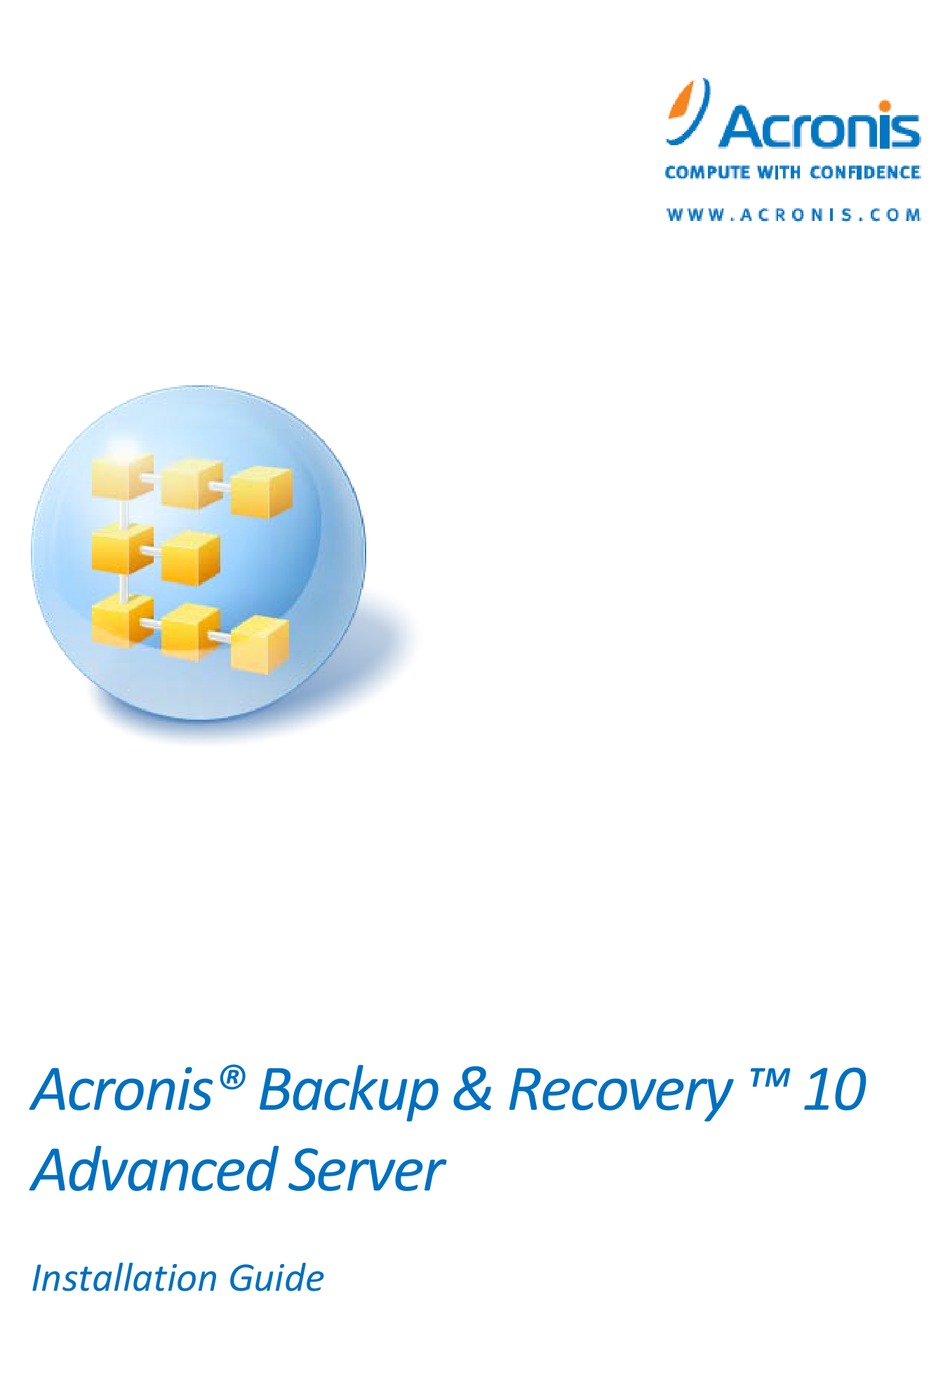 installing and using acronis home on windows server 2008